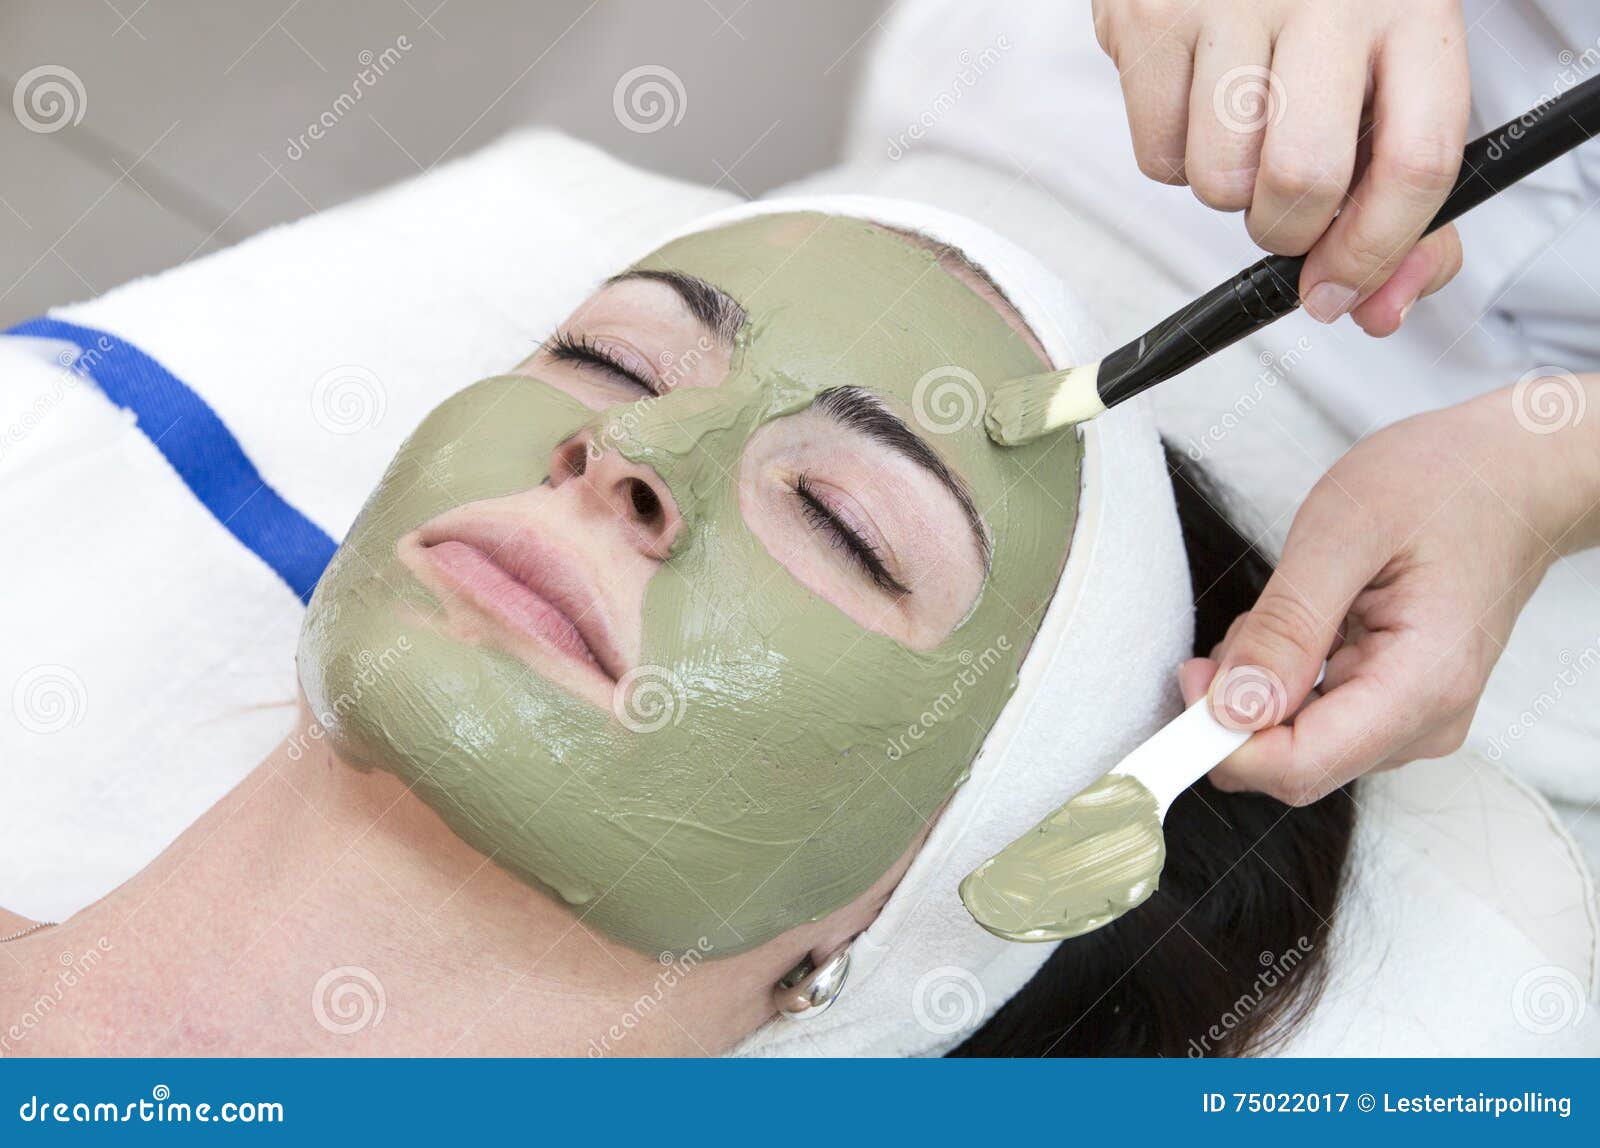 Process Of Massage And Facials Stock Image Image Of Healing Gentle